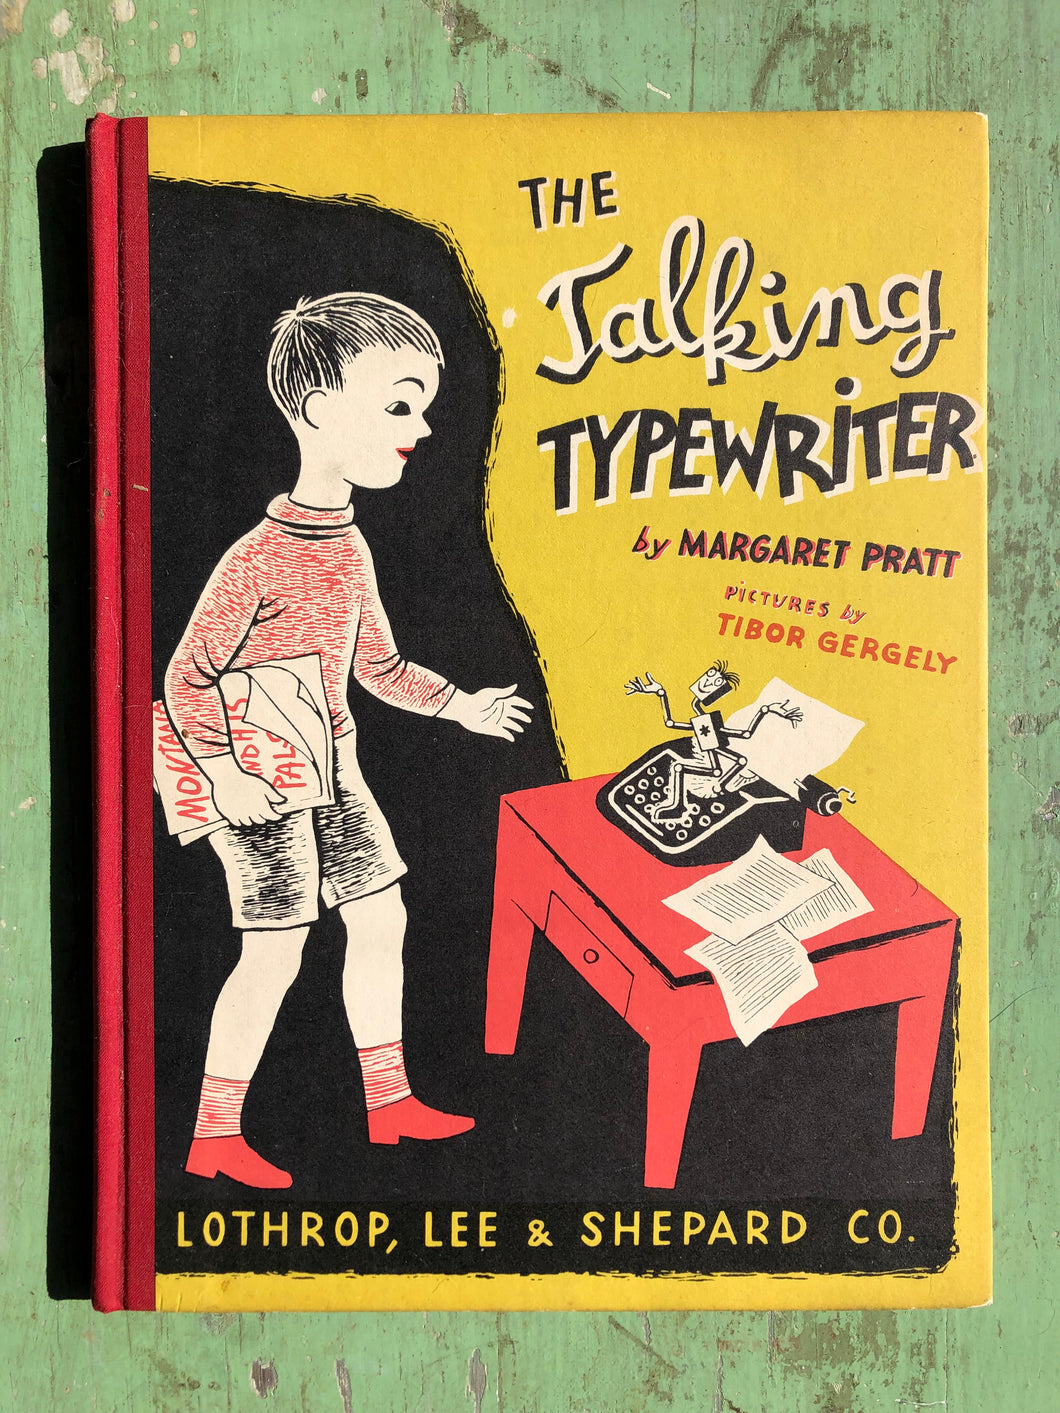 The Talking Typewriter by Margaret Pratt. Illustrated by Tabor Gergely